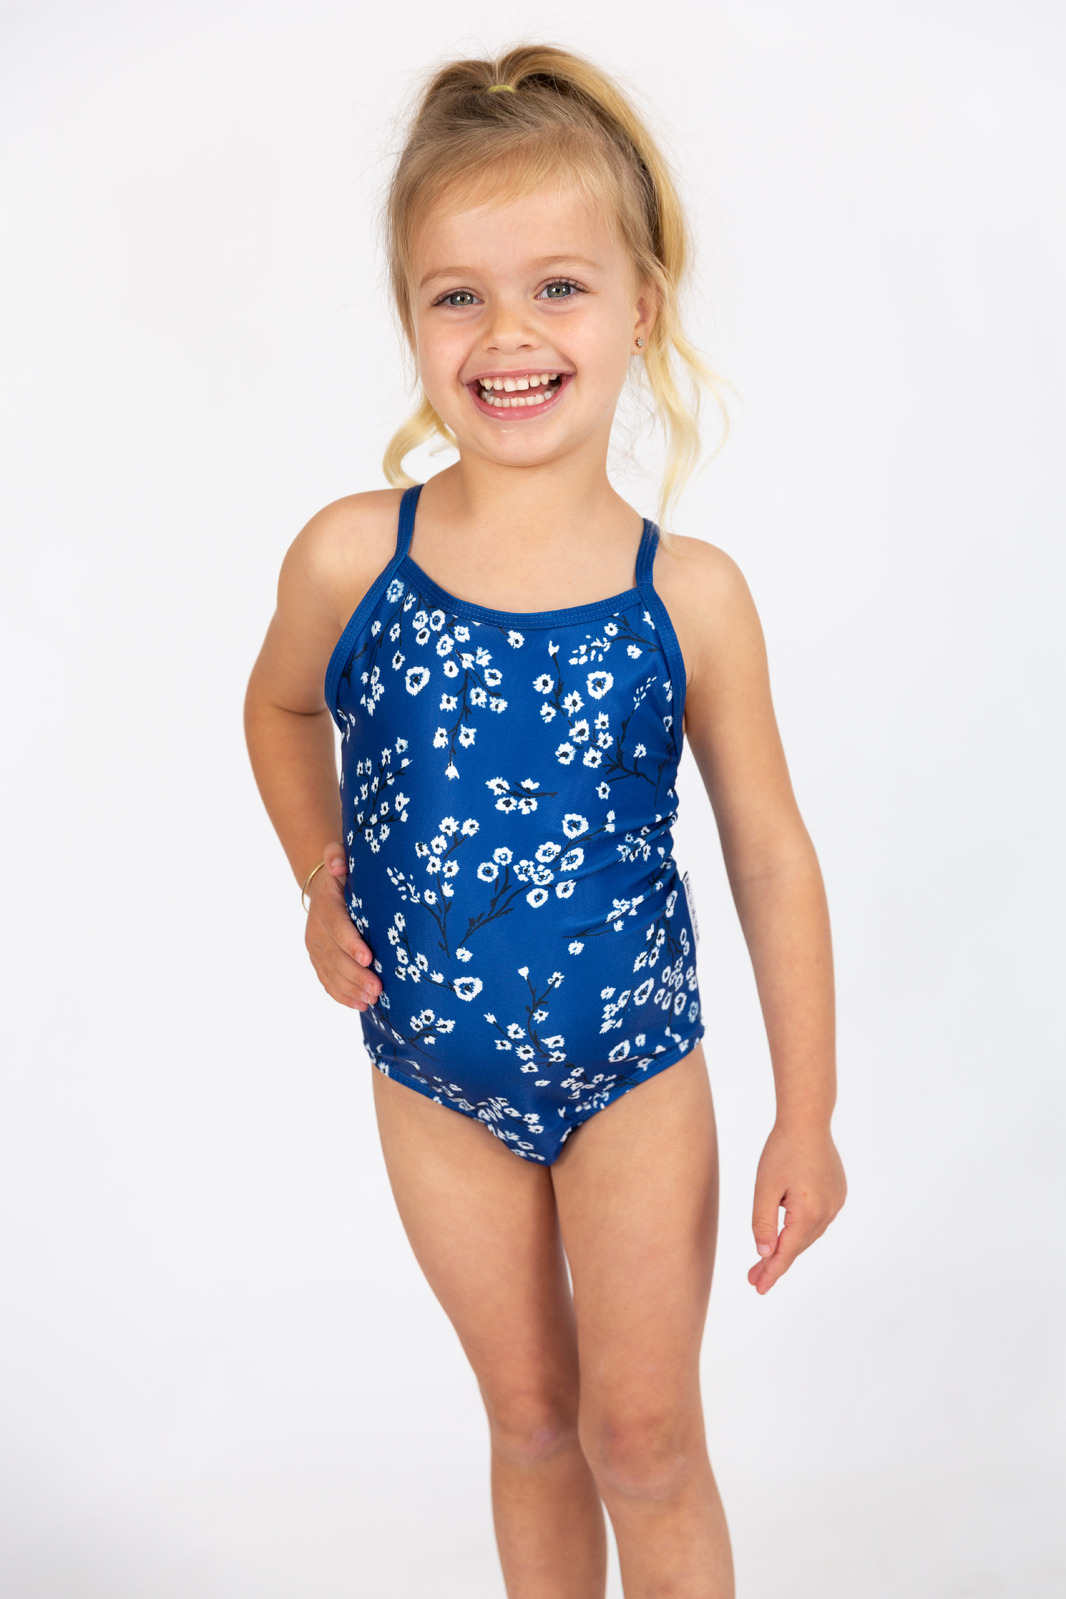 Girls Blooms Bathers (Sizes 4,5,7)